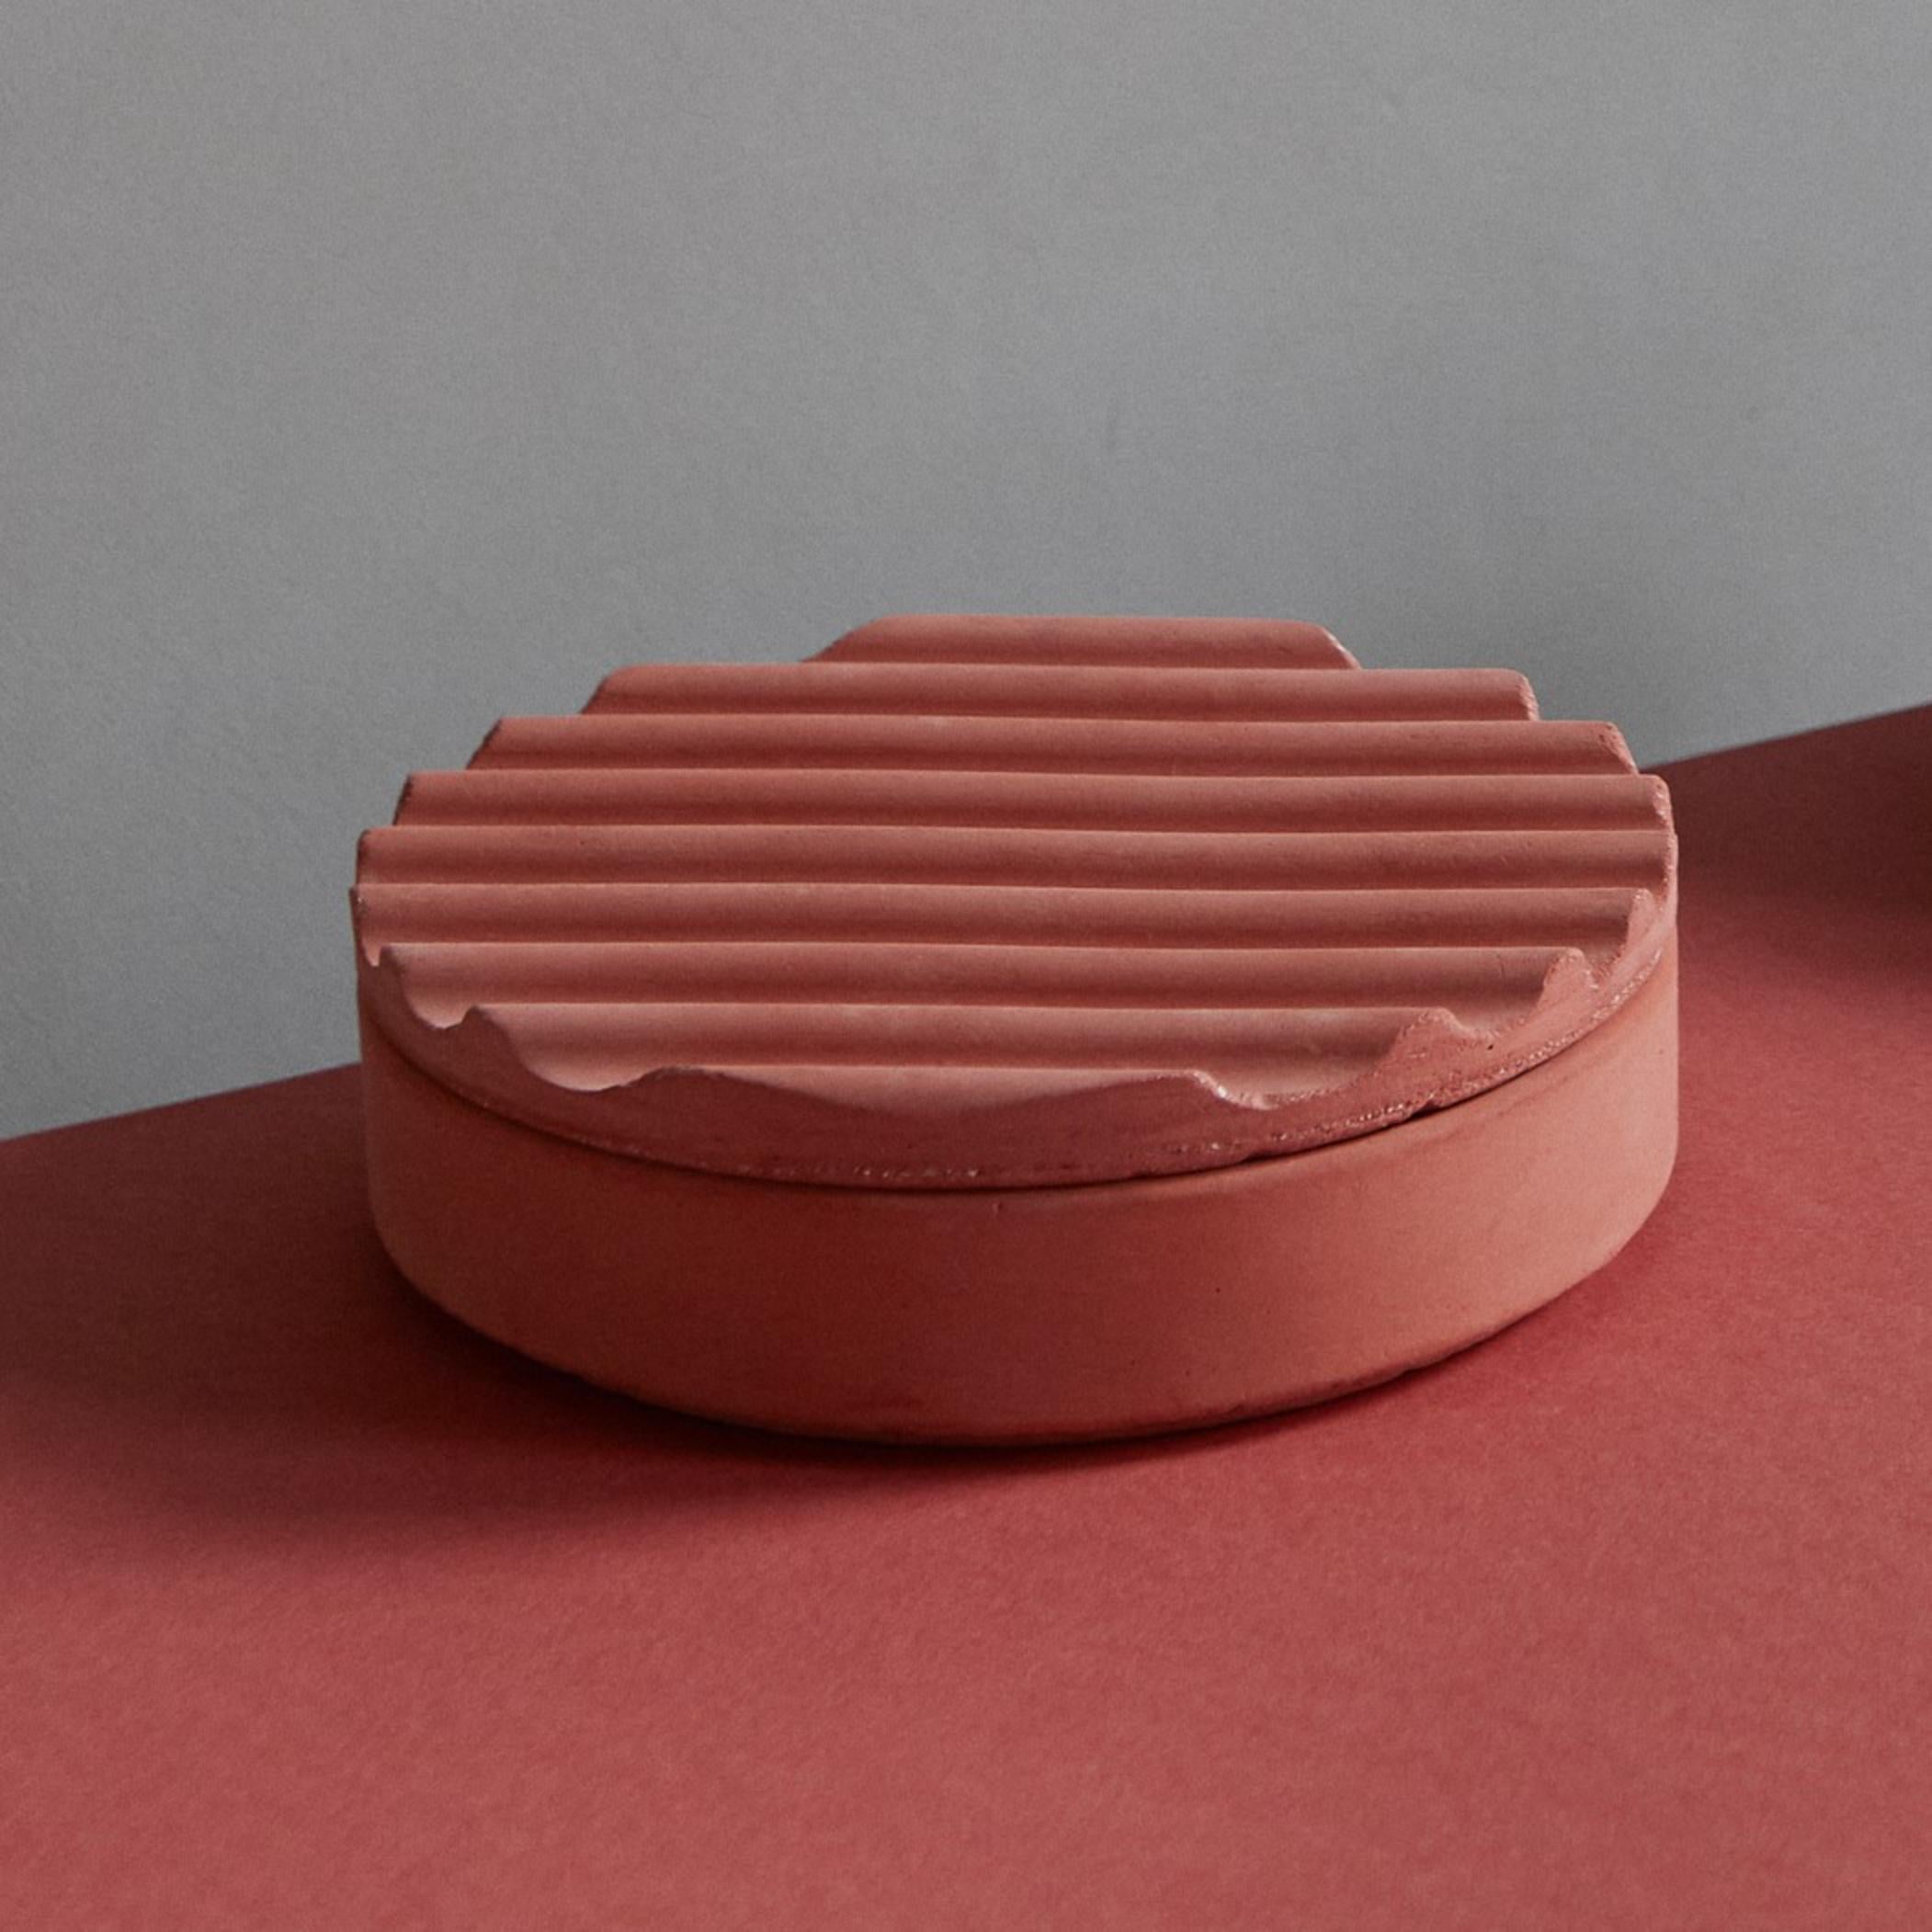 Set of 4 Ripple vessels by Derya Arpac
Dimensions: D 17 x H 7 cm
Materials: Pigmented Concrete
Also Available: Other colors available.

Derya Arpac is a Copenhagen based architect and furniture designer.
She holds a Master of Arts in